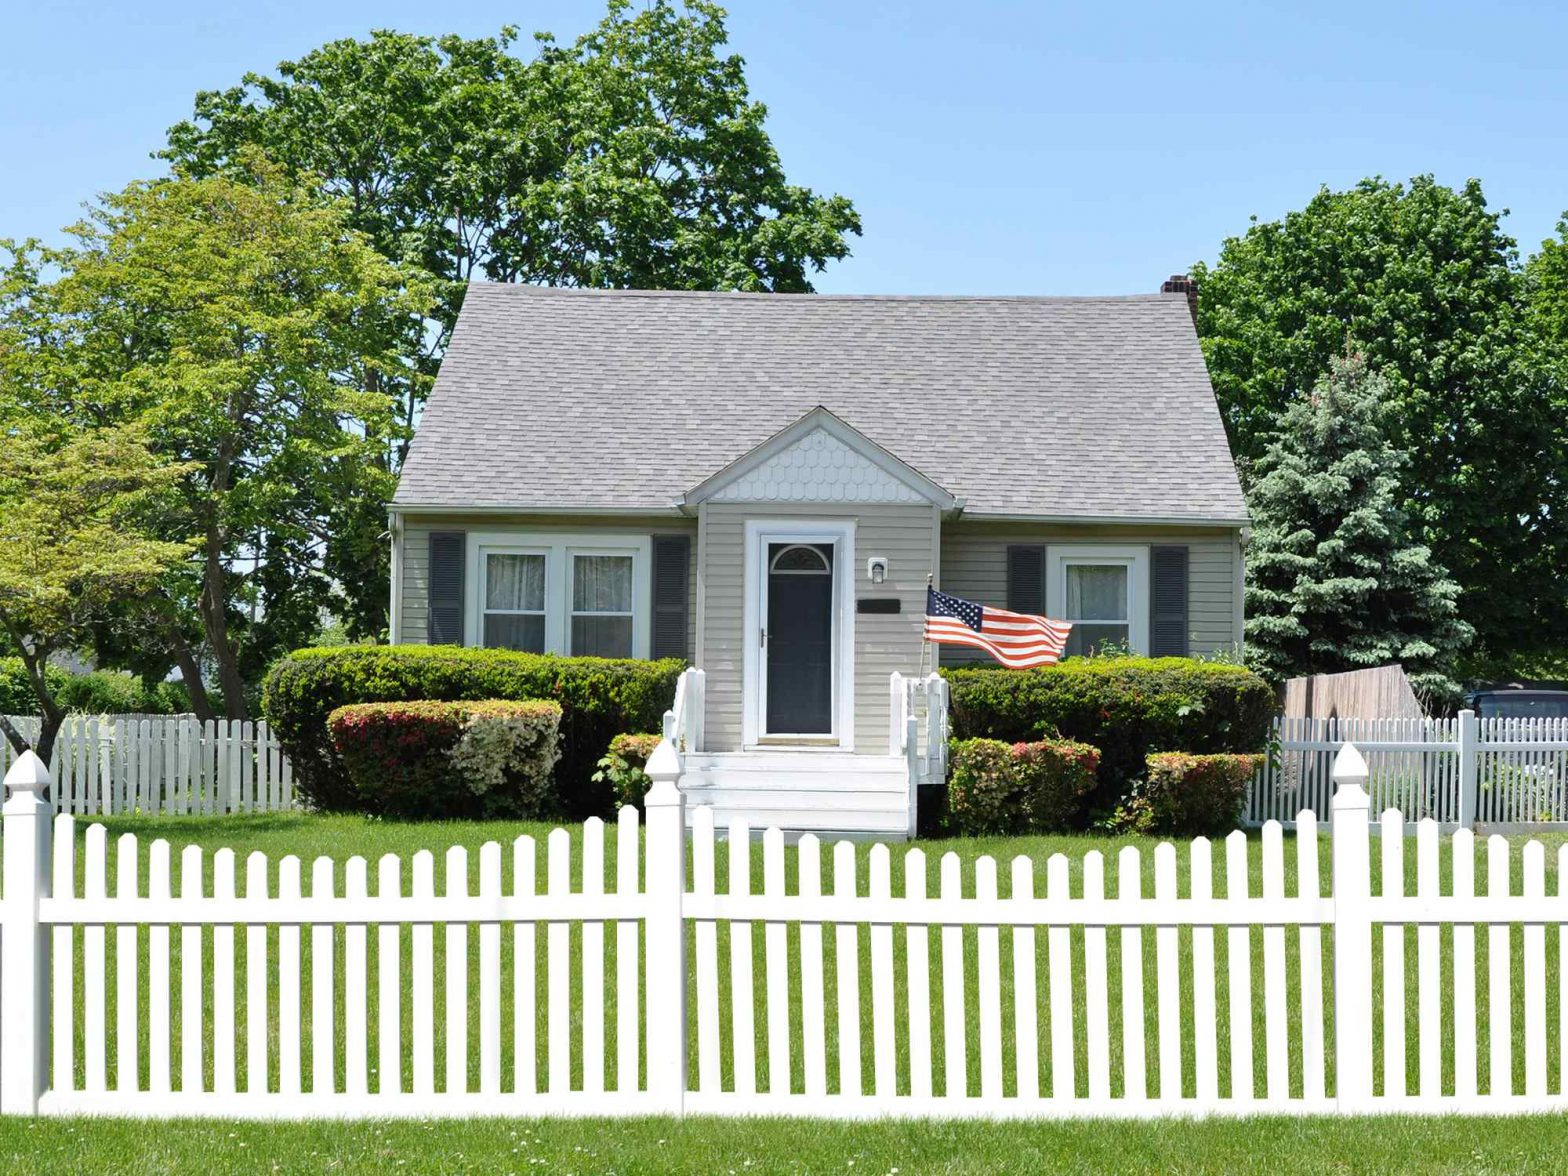 Photo of a vinyl picket fence in front of a residence